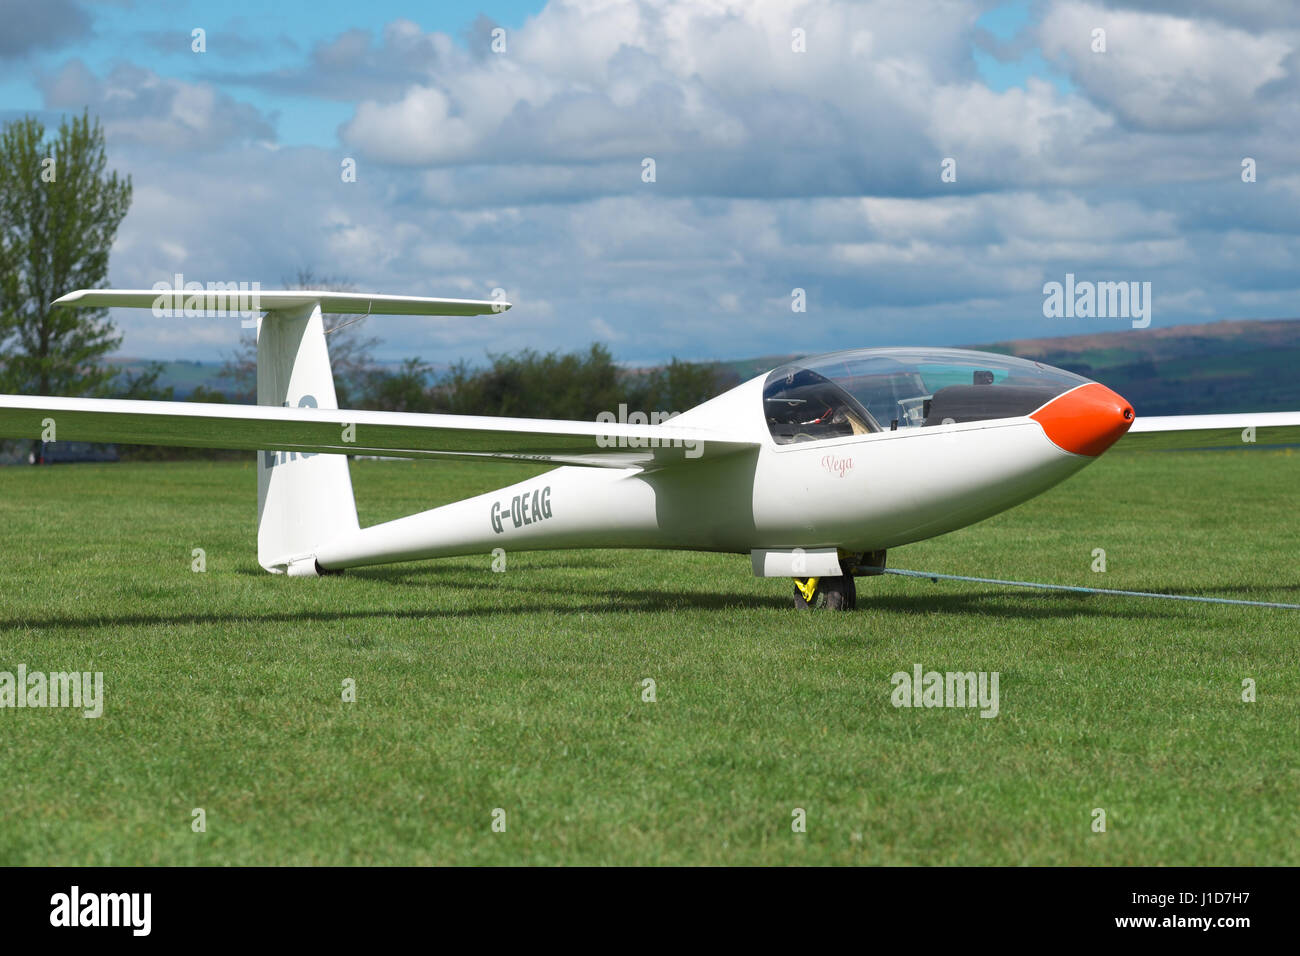 Slingsby T65A Vega single seat glider built in 1979 UK Stock Photo